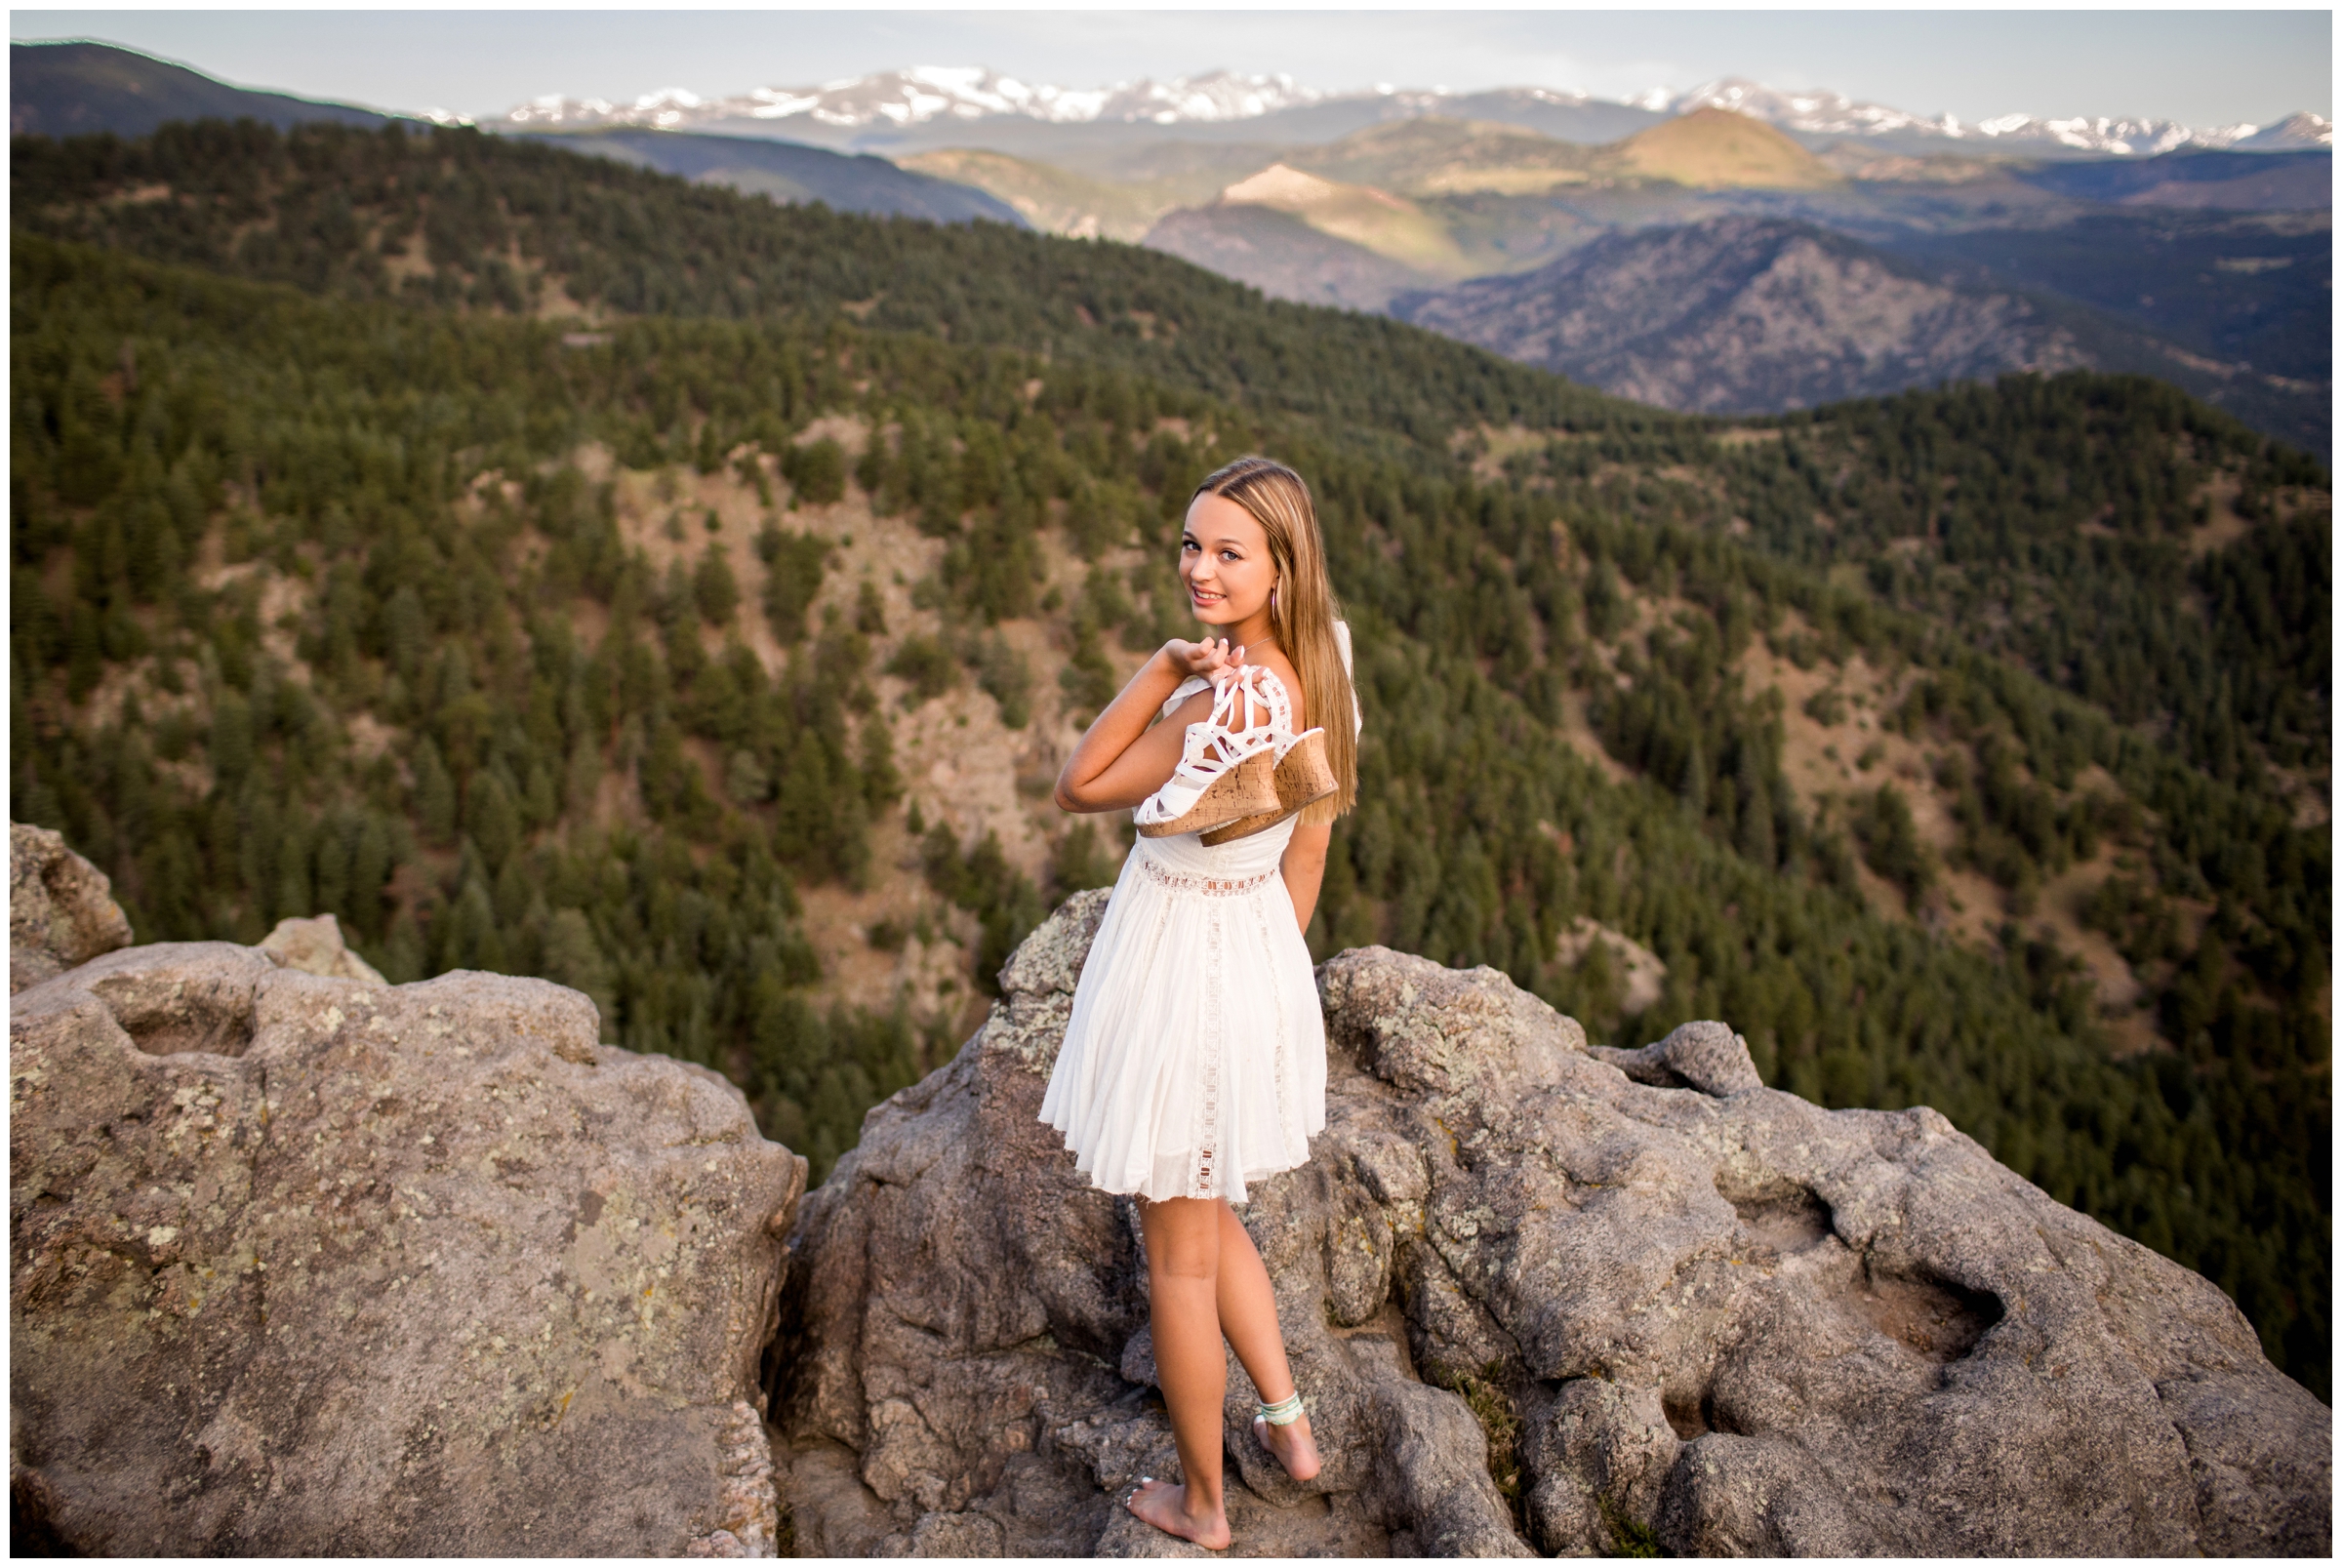 Boulder Colorado senior photography at Lost Gulch Lookout by portrait photographer Plum Pretty Photography